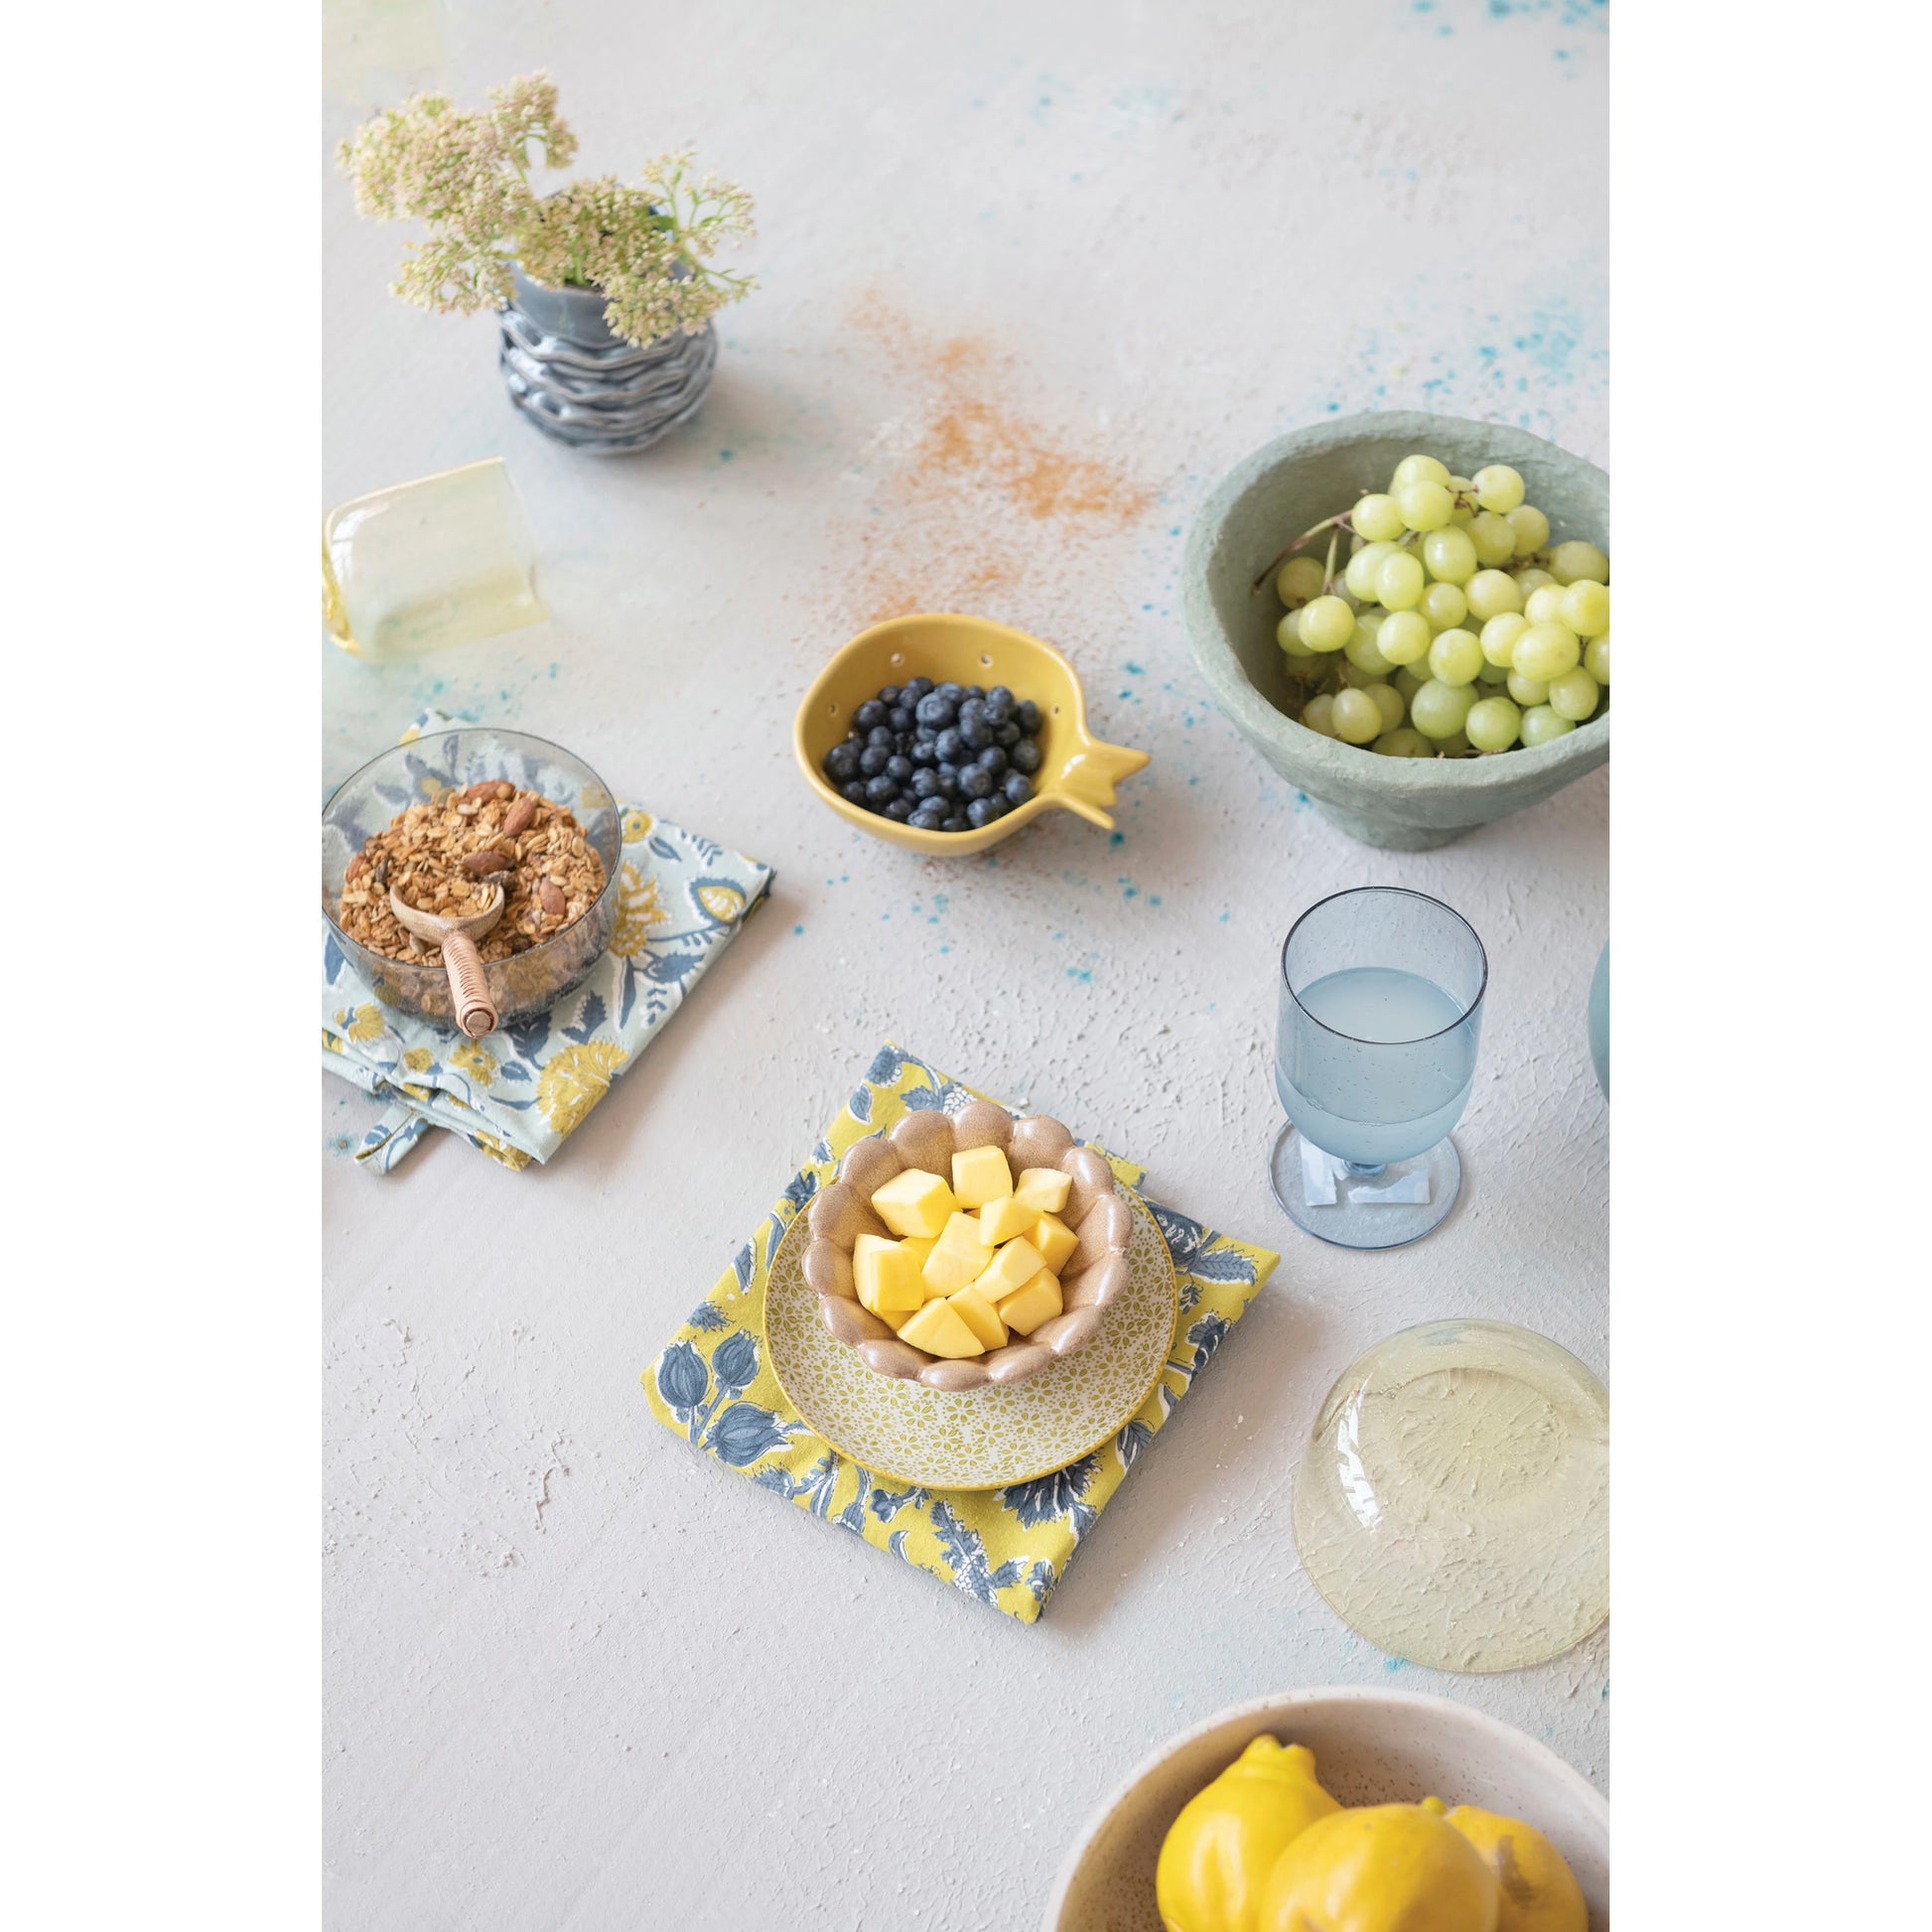 table display with the cottone tea towels with floral patterns drinking glass large bowl of grapes and small bowls with fruit on a white table